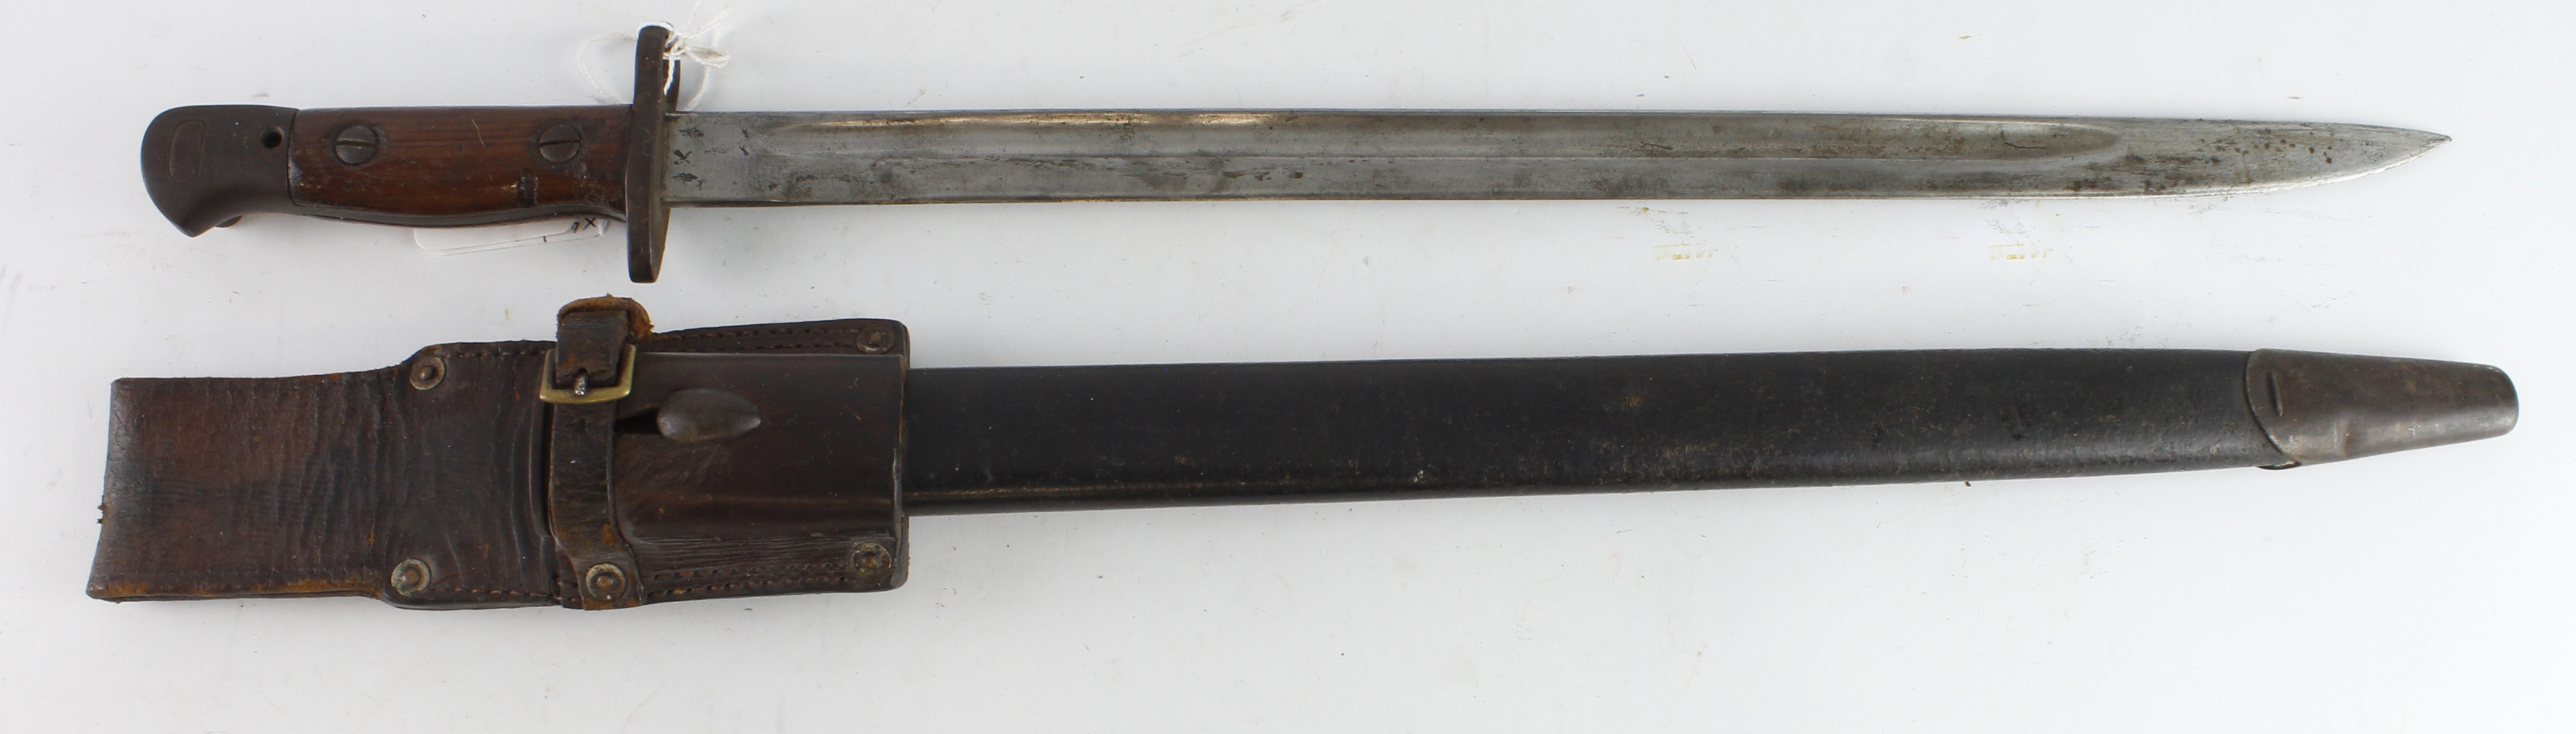 Scarce and interesting P07 bayonet made by "CV" (Vickers Crayford) in Nov 1918. Only 10000